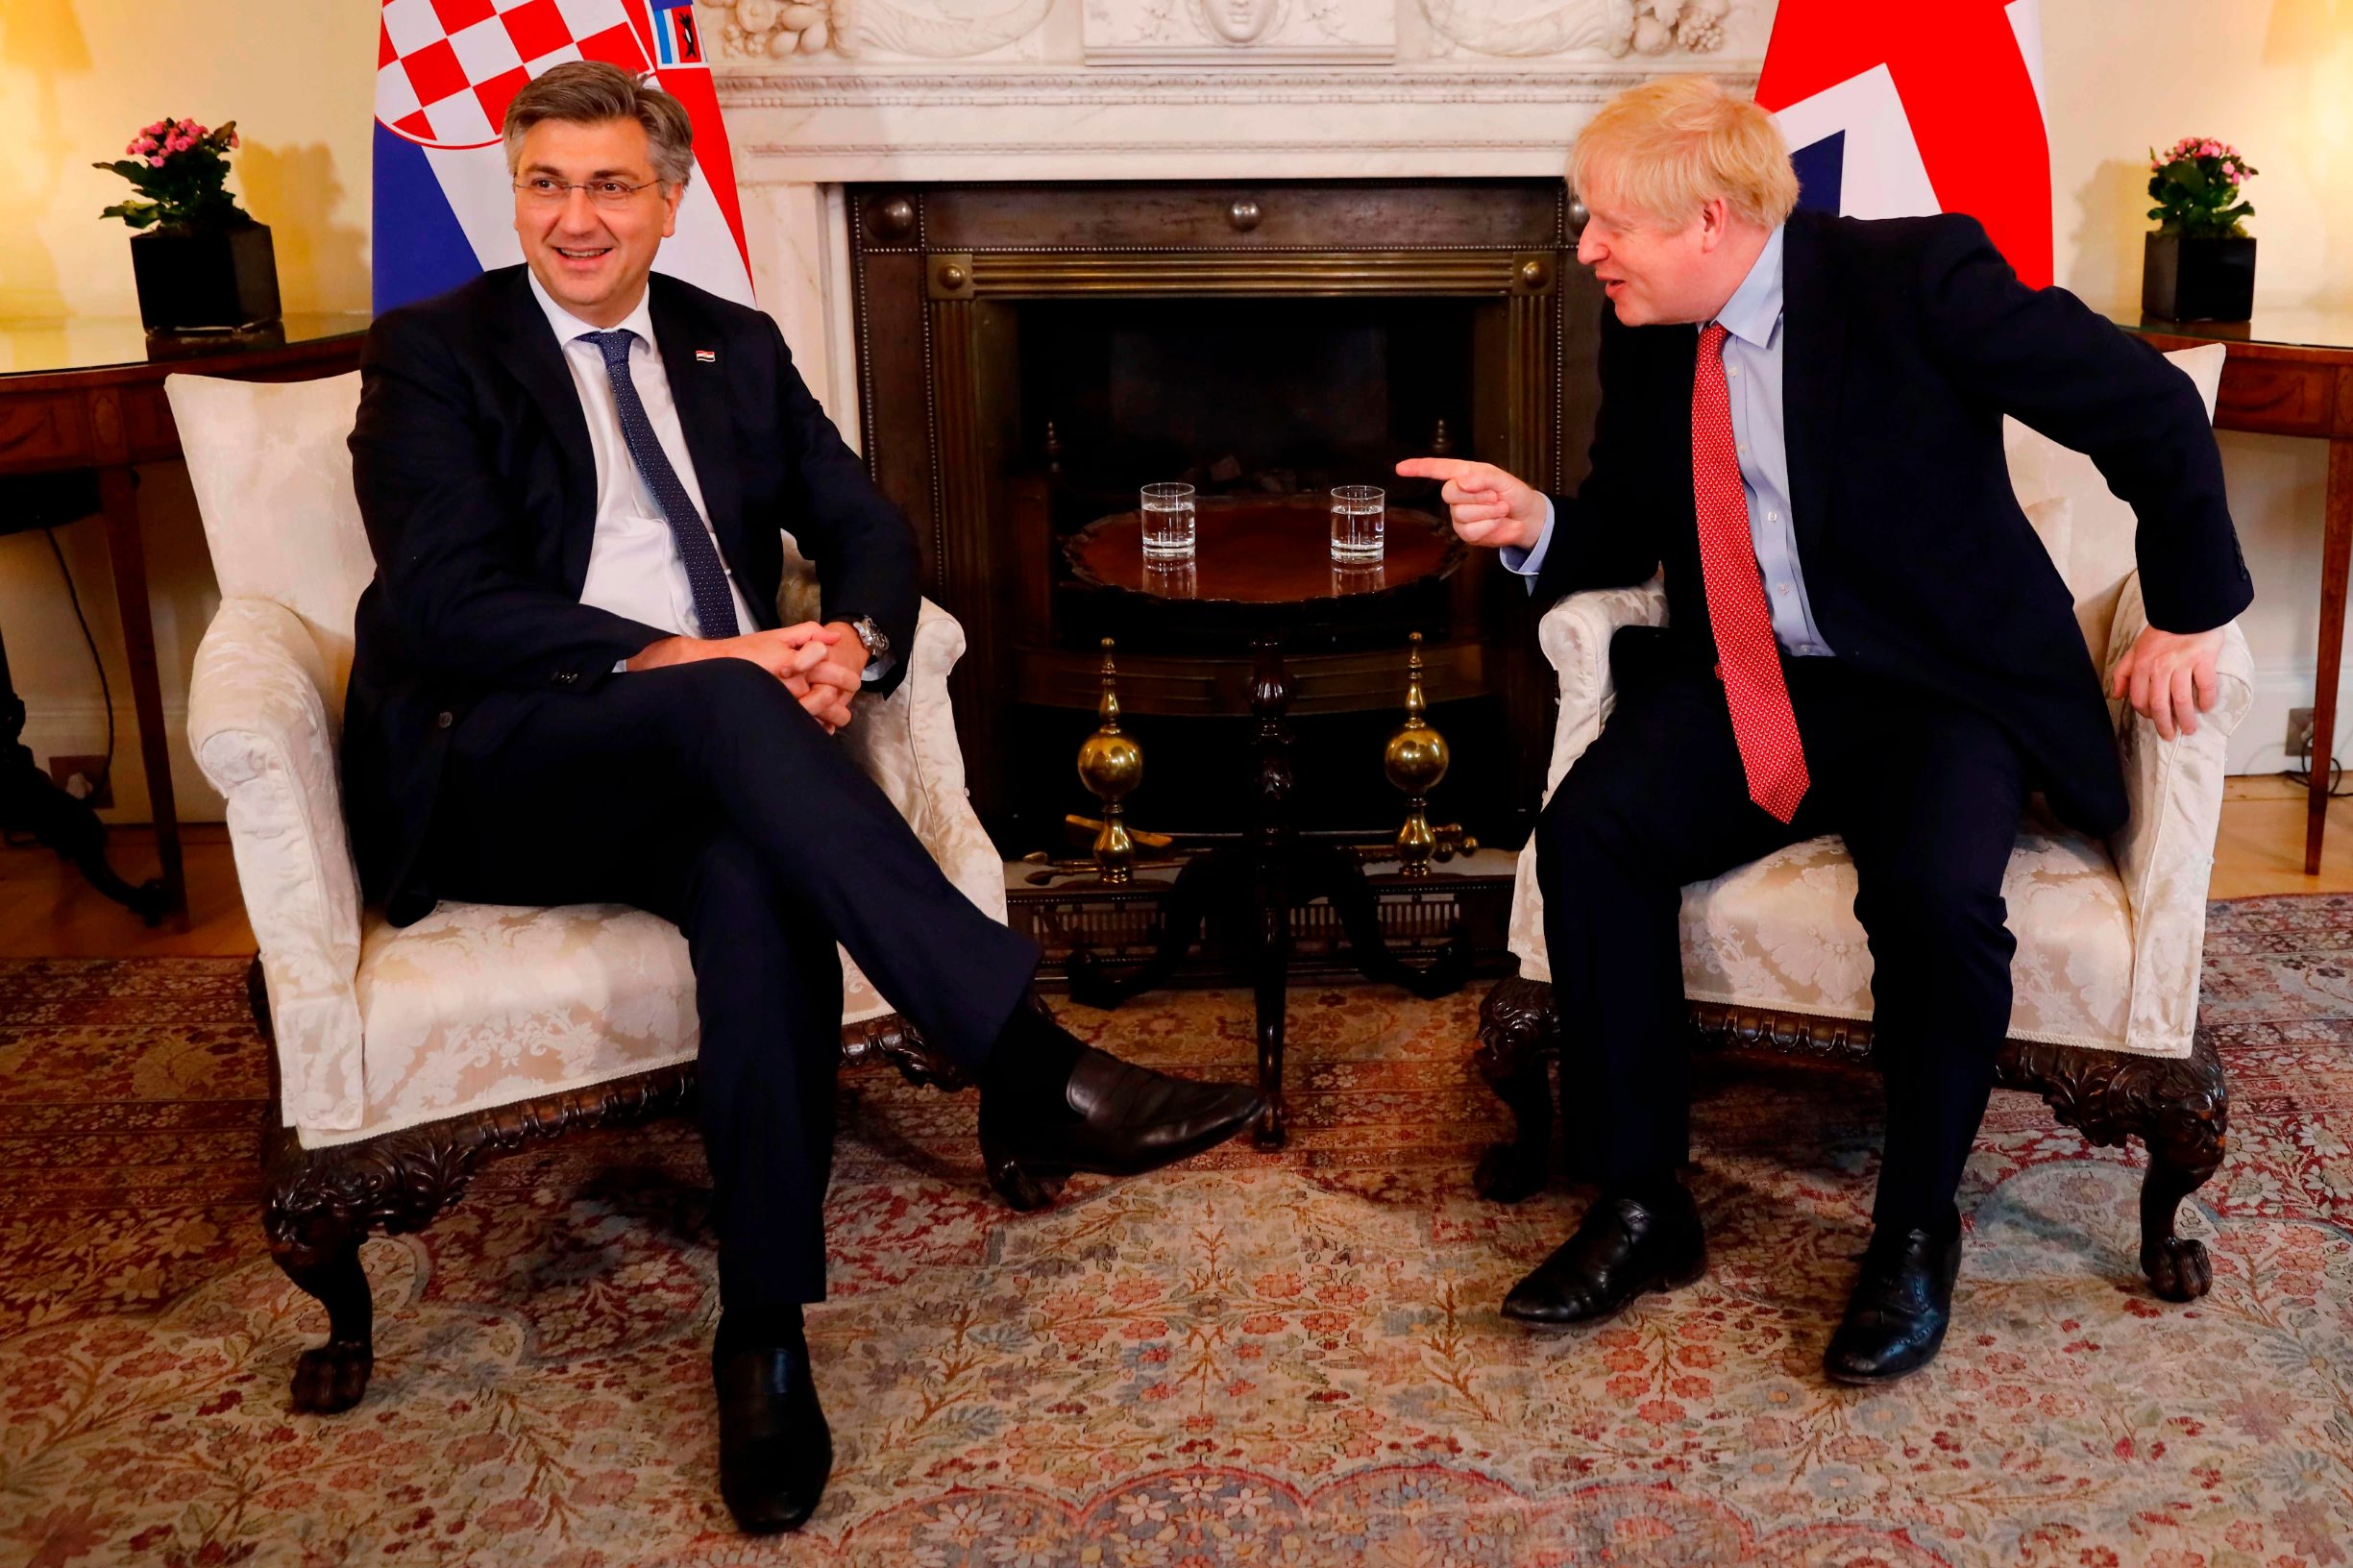 Britain's Prime Minister Boris Johnson (R) and Croatia's Prime Minister Andrej Plenkovic (L) sit down for a meeting at 10 Downing Street in London on February 24, 2020